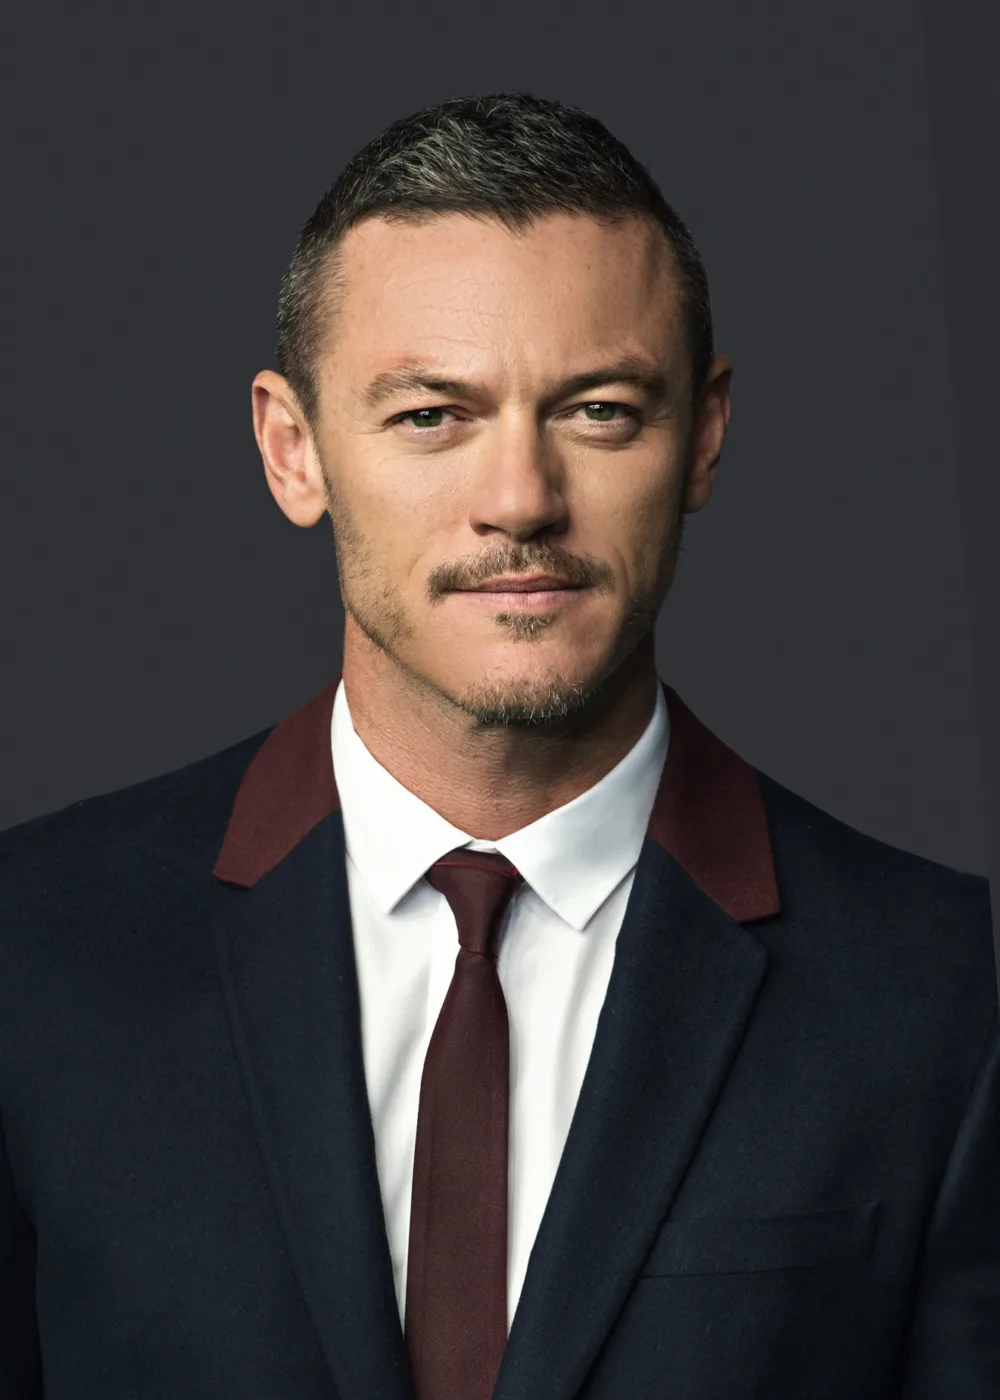 Luke Evans is a Welsh actor and singer known for his versatile performances in film, television, and theater. Born on April 15, 1979, in Aberbargoed, Wales, Evans began his career on stage before making his film debut in the 2010 remake of Clash of the Titans. Since then, Evans has gone on to star in a wide variety of film and television projects, earning critical acclaim for his performances in movies like The Girl on the Train, Beauty and the Beast, and Ma. He has also lent his vocal talents to several musical productions, including the film adaptation of Les Misérables. In addition to his acting work, Evans is known for his commitment to charitable causes, supporting organizations like the Teenage Cancer Trust and the Elton John AIDS Foundation. He has also been recognized for his work as an LGBTQ+ advocate, speaking out about the importance of representation and equality in the entertainment industry. With his talent, charisma, and dedication to making a difference in the world, Evans has become a respected and beloved figure in the entertainment industry, inspiring fans around the world with his performances and his advocacy work.